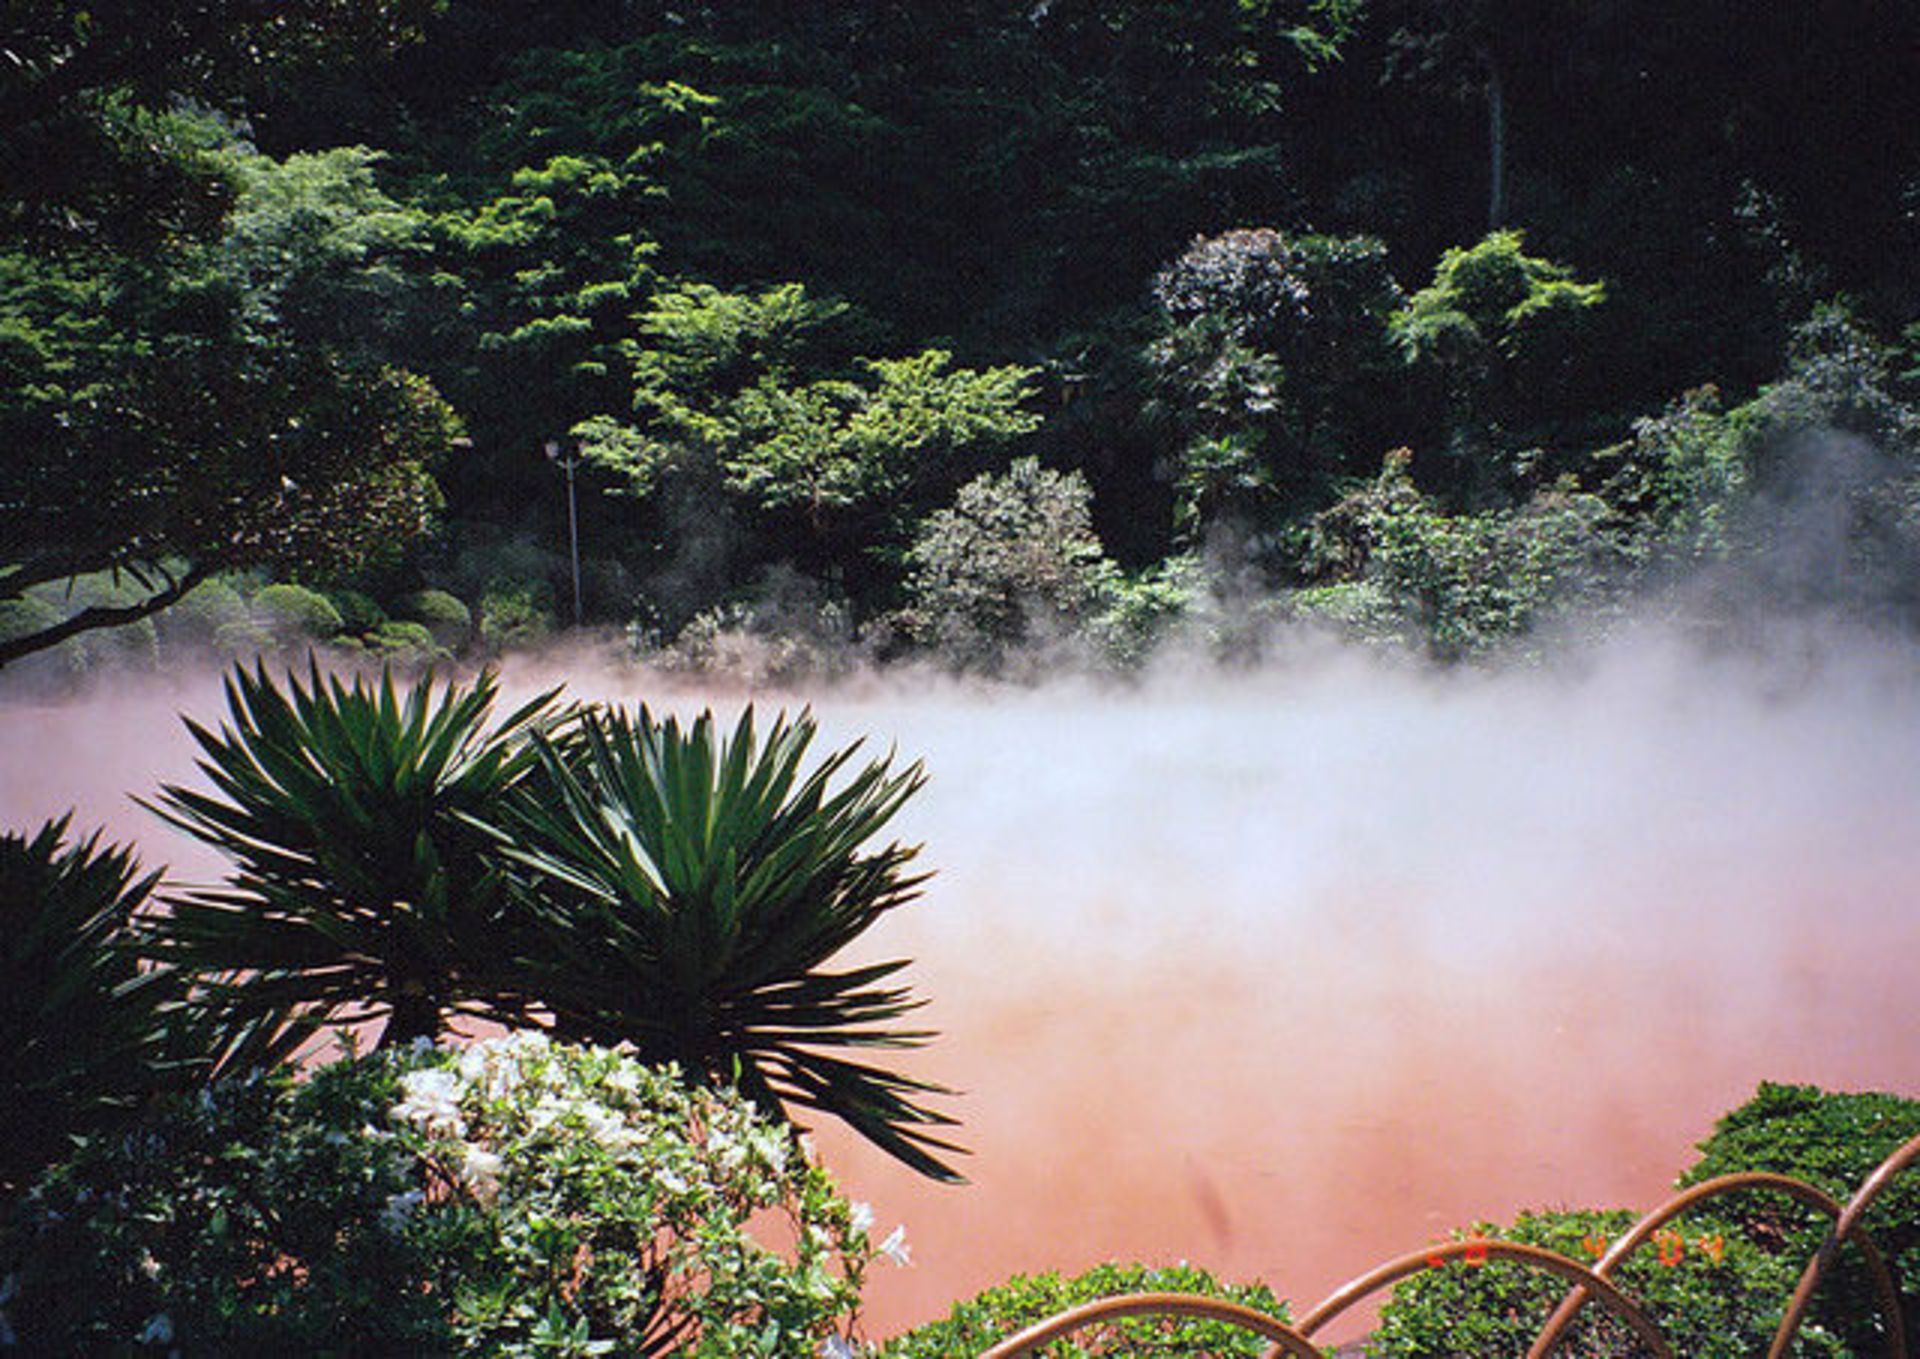 geysers-and-springs-1